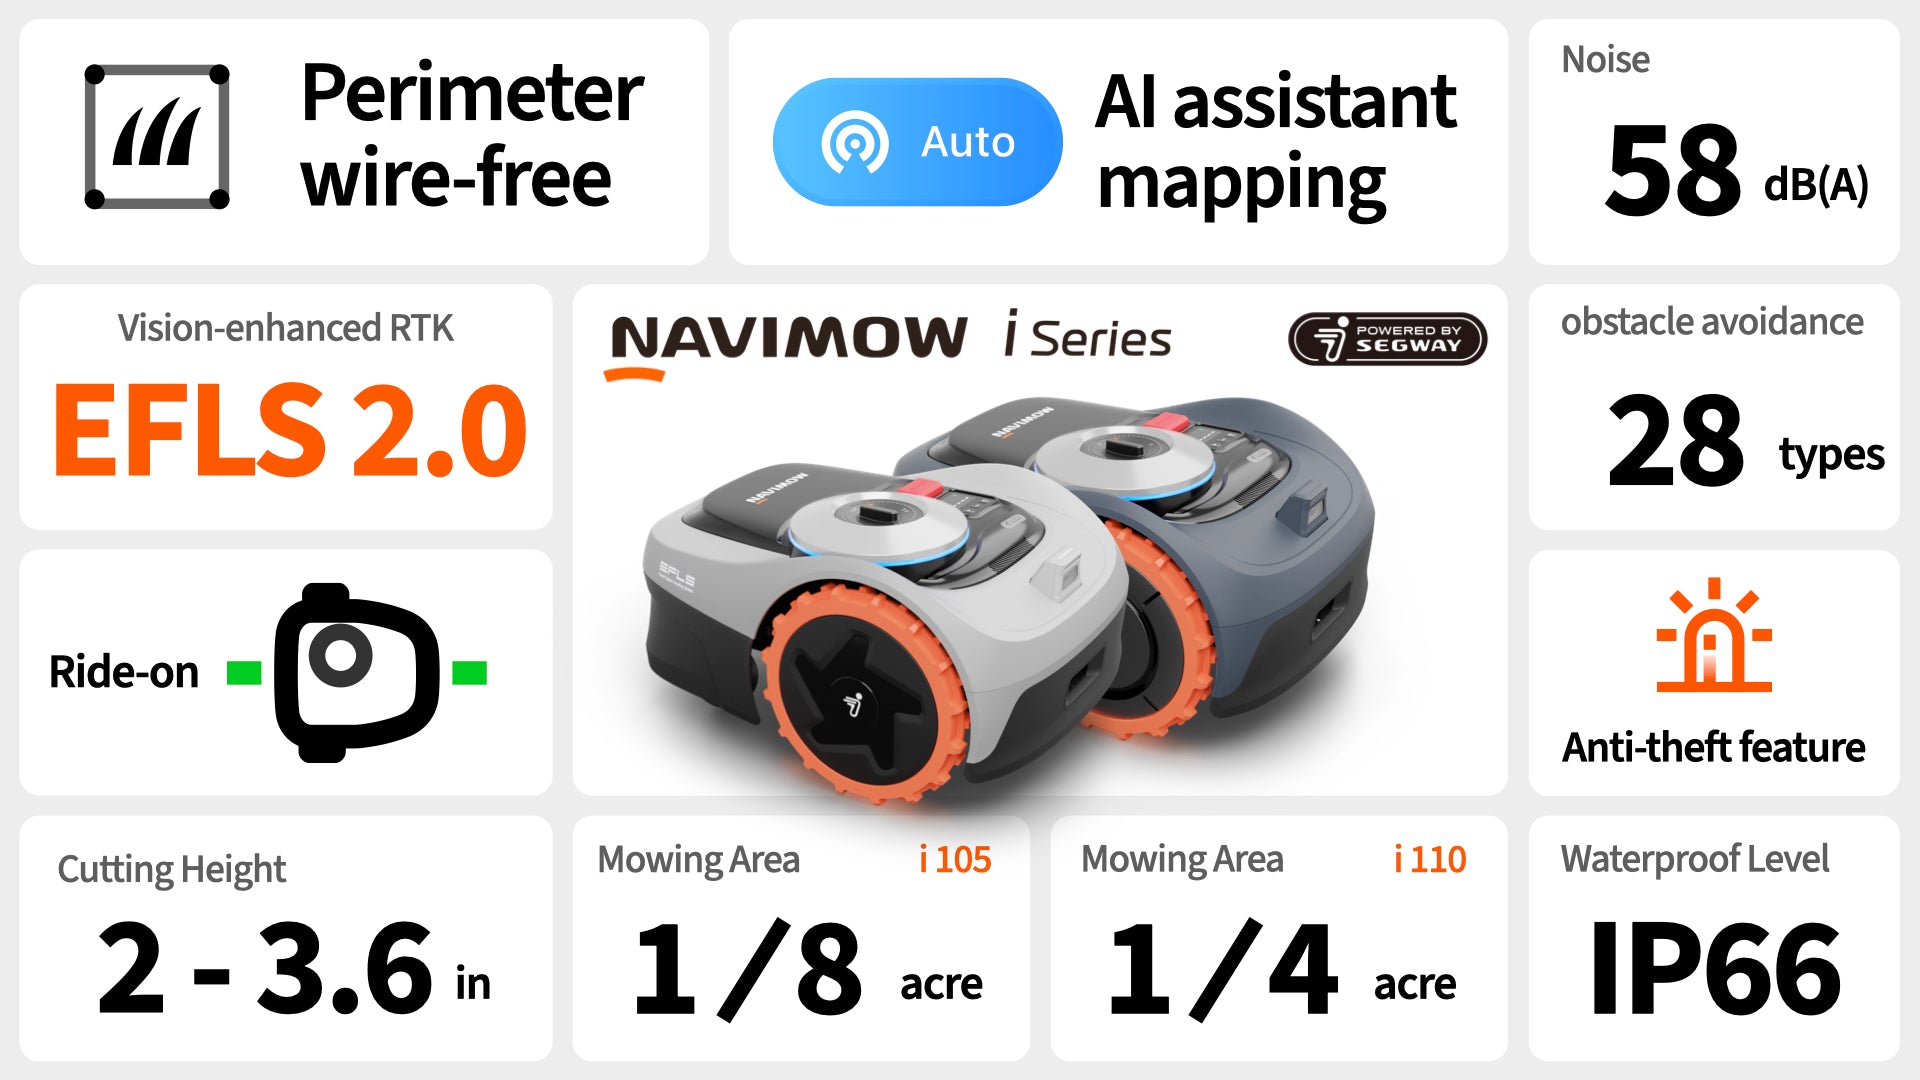 Robot cortacésped Segway Navimow serie i